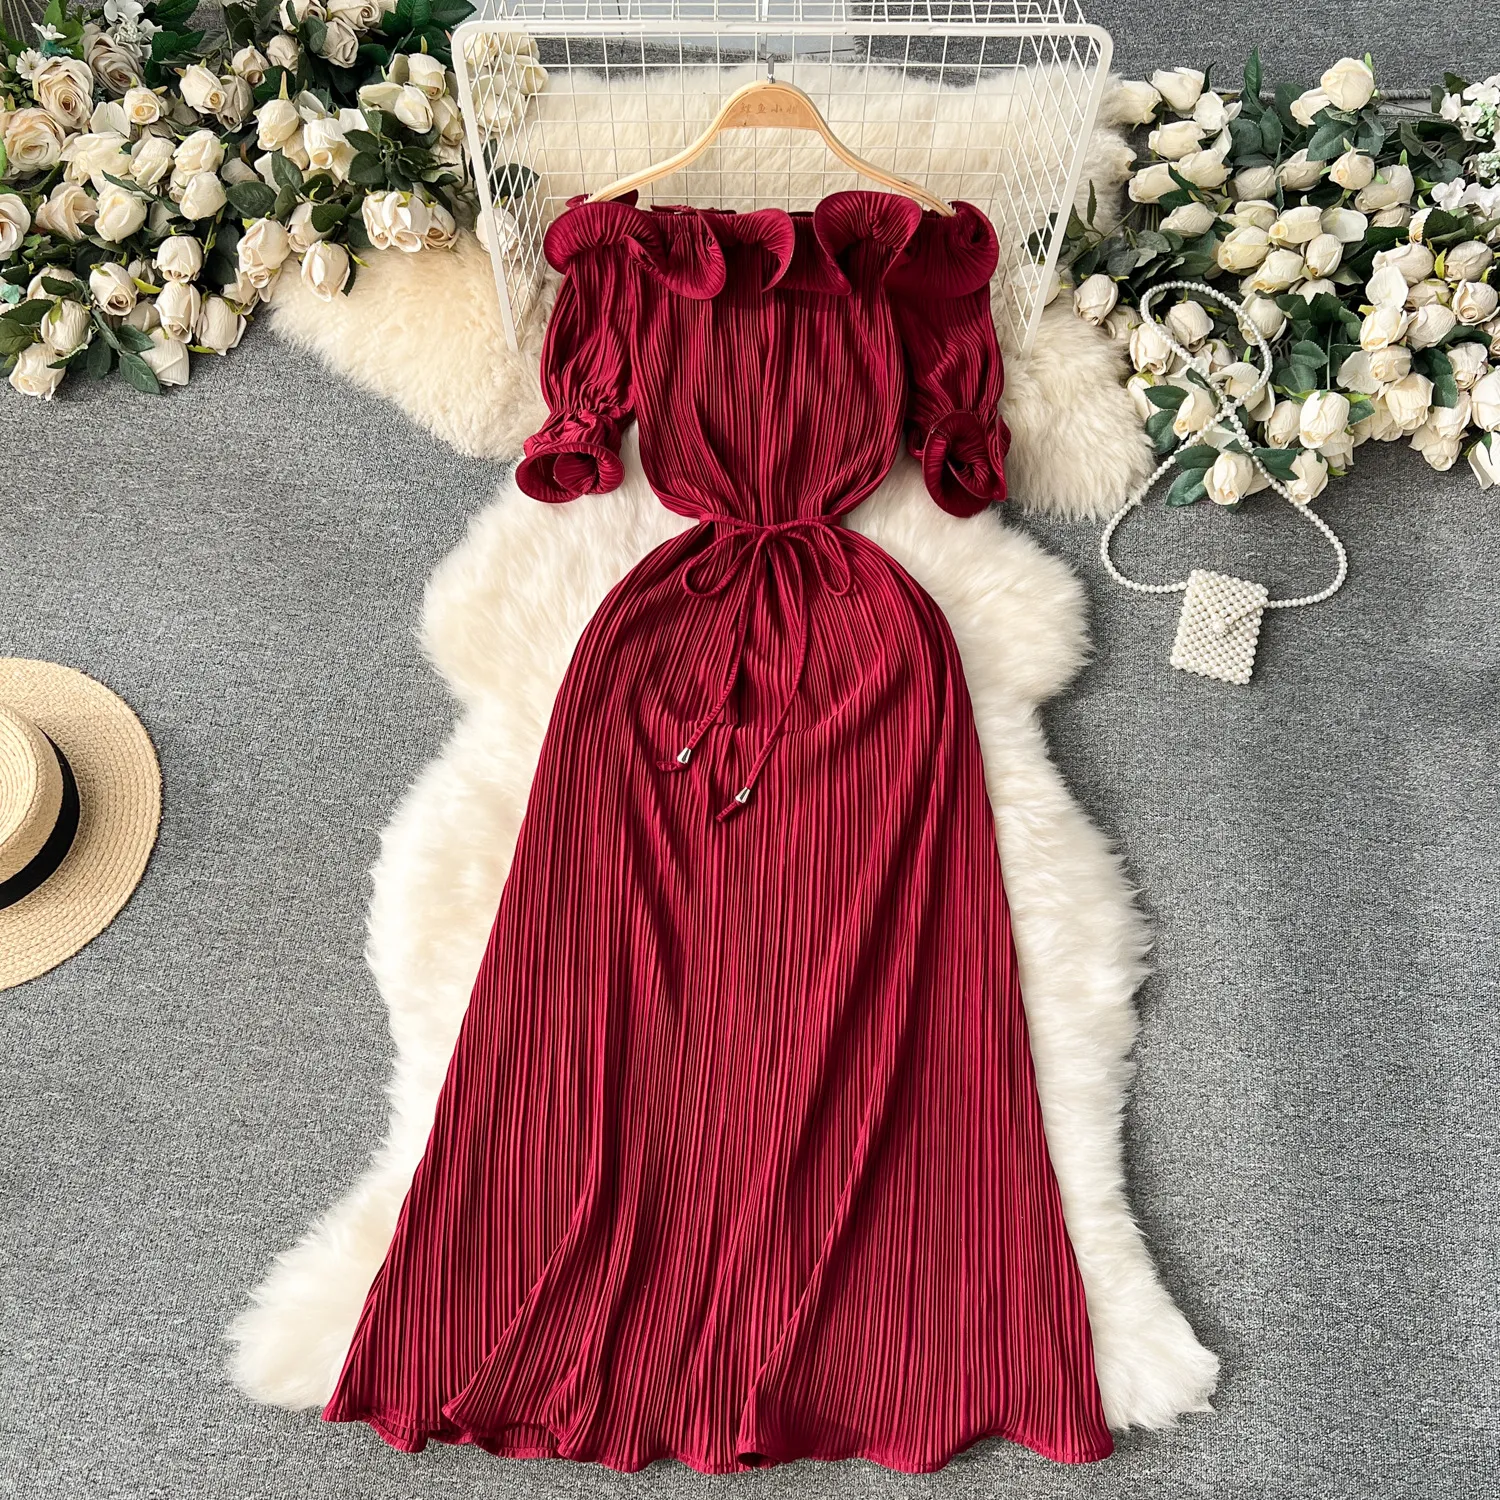 French retro socialite style formal dress with heavy craftsmanship and pleated design, with a ruffled edge and a one line collar that is off the shoulder, exuding a stylish and elegant dress for women